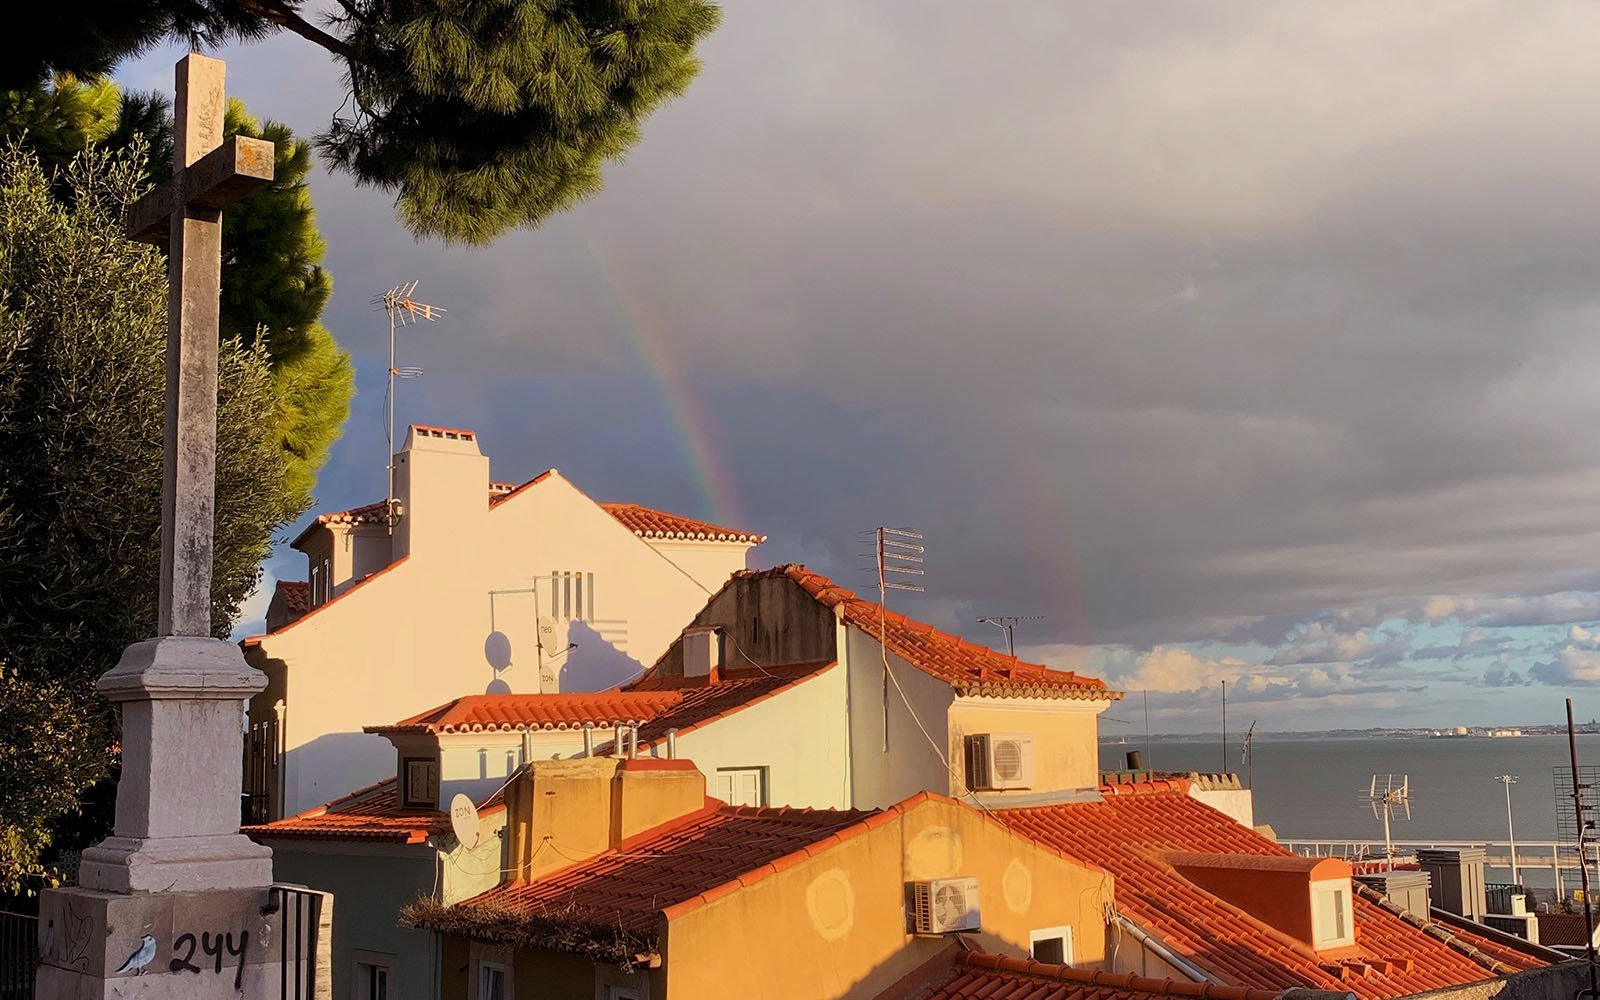 rooftops with dramatic sky and rainbow